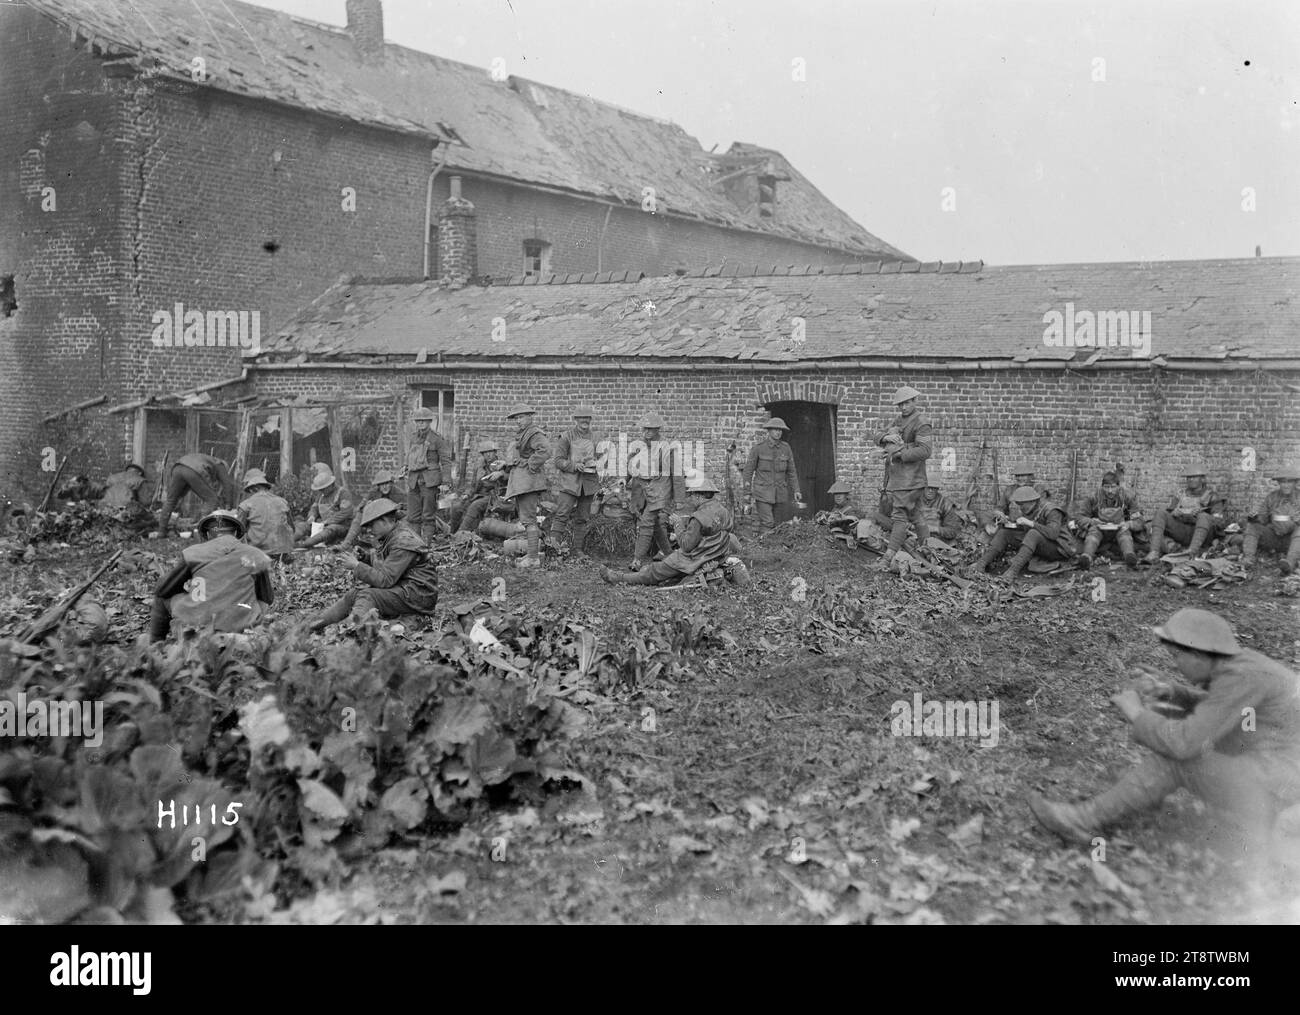 New Zealand soldiers eating after an attack near Solesmes, France, World War I, New Zealand soldiers sit eating lunch out of mess tins after an attack in France towards the end of World War I. They appear to be in a garden of a French dwelling near the town of Solesmes. Photograph taken 28 October 1918 Stock Photo